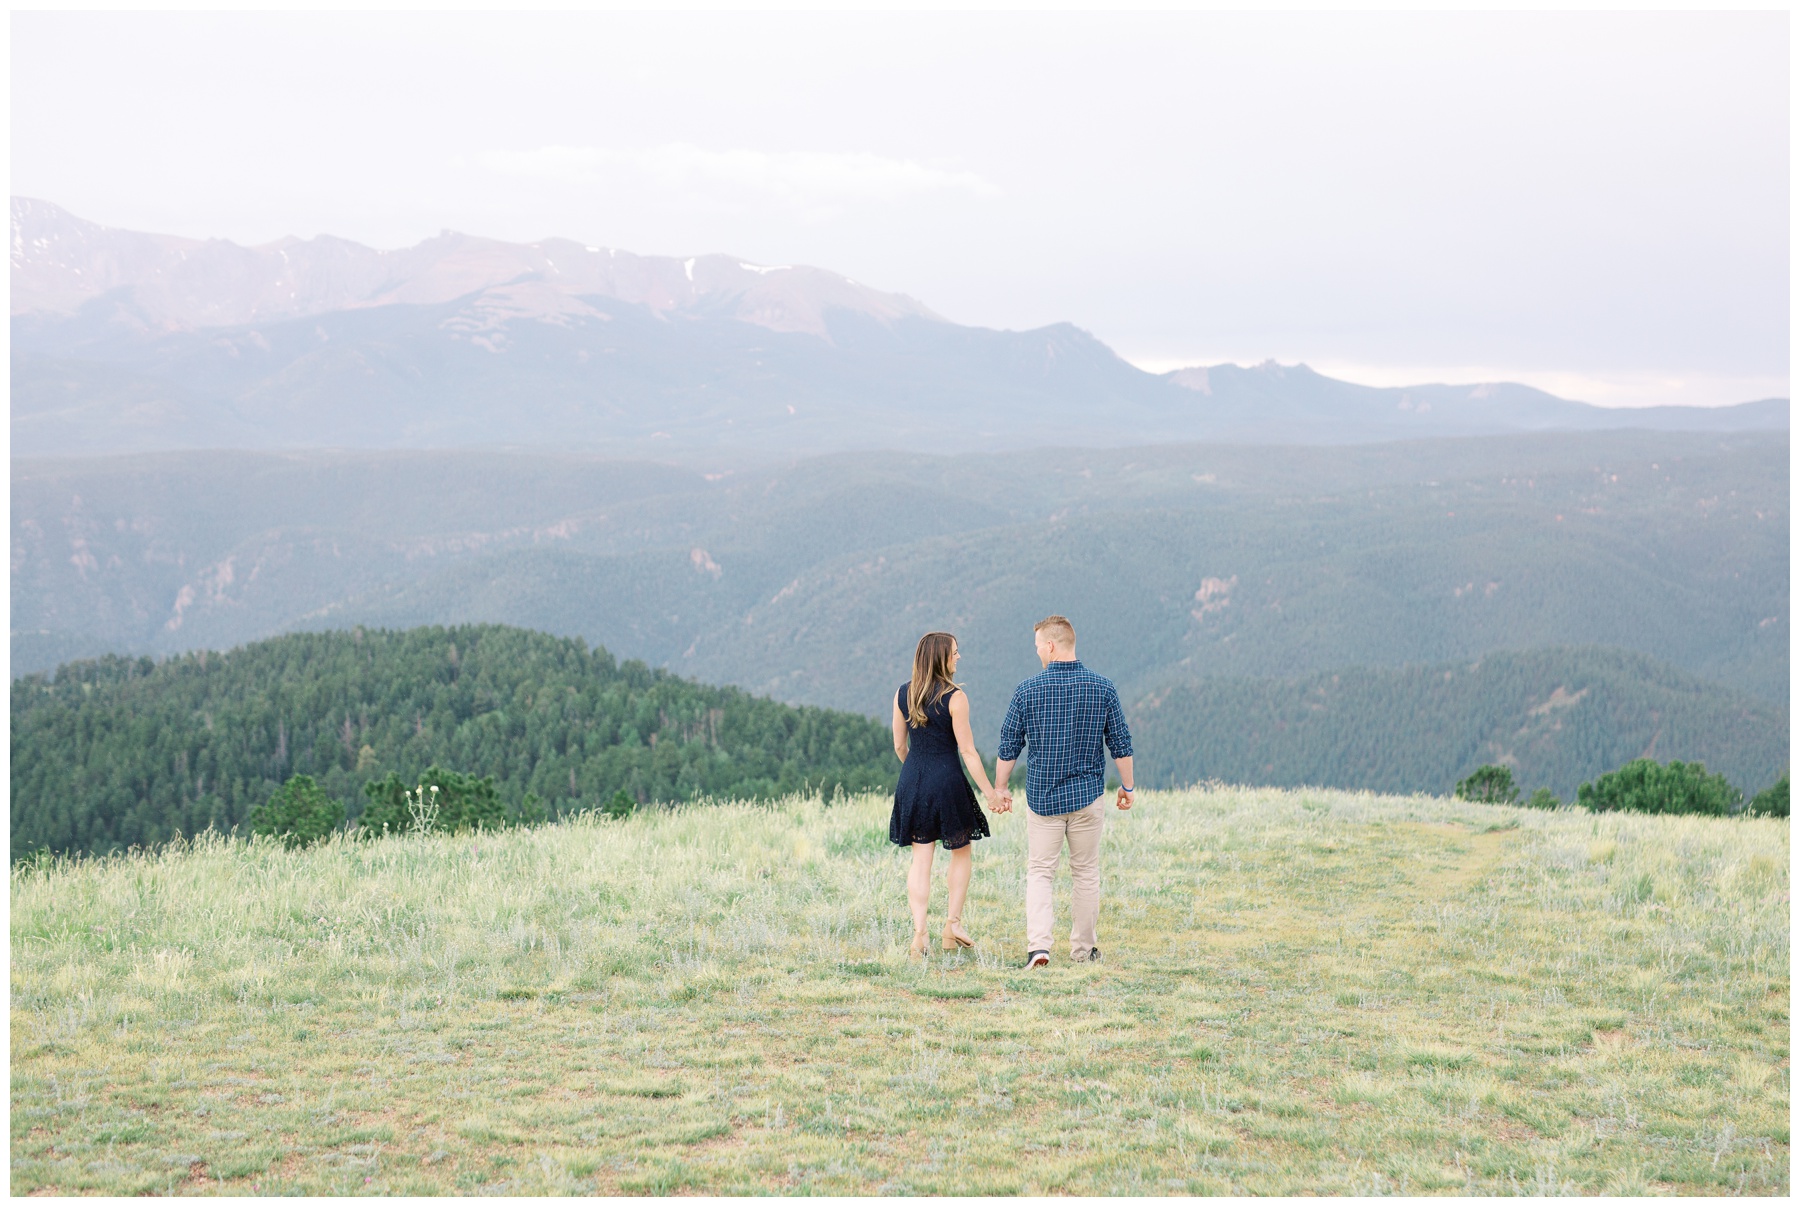 landscape mountain view couple holding hands walking away | Cat Murphy Photography